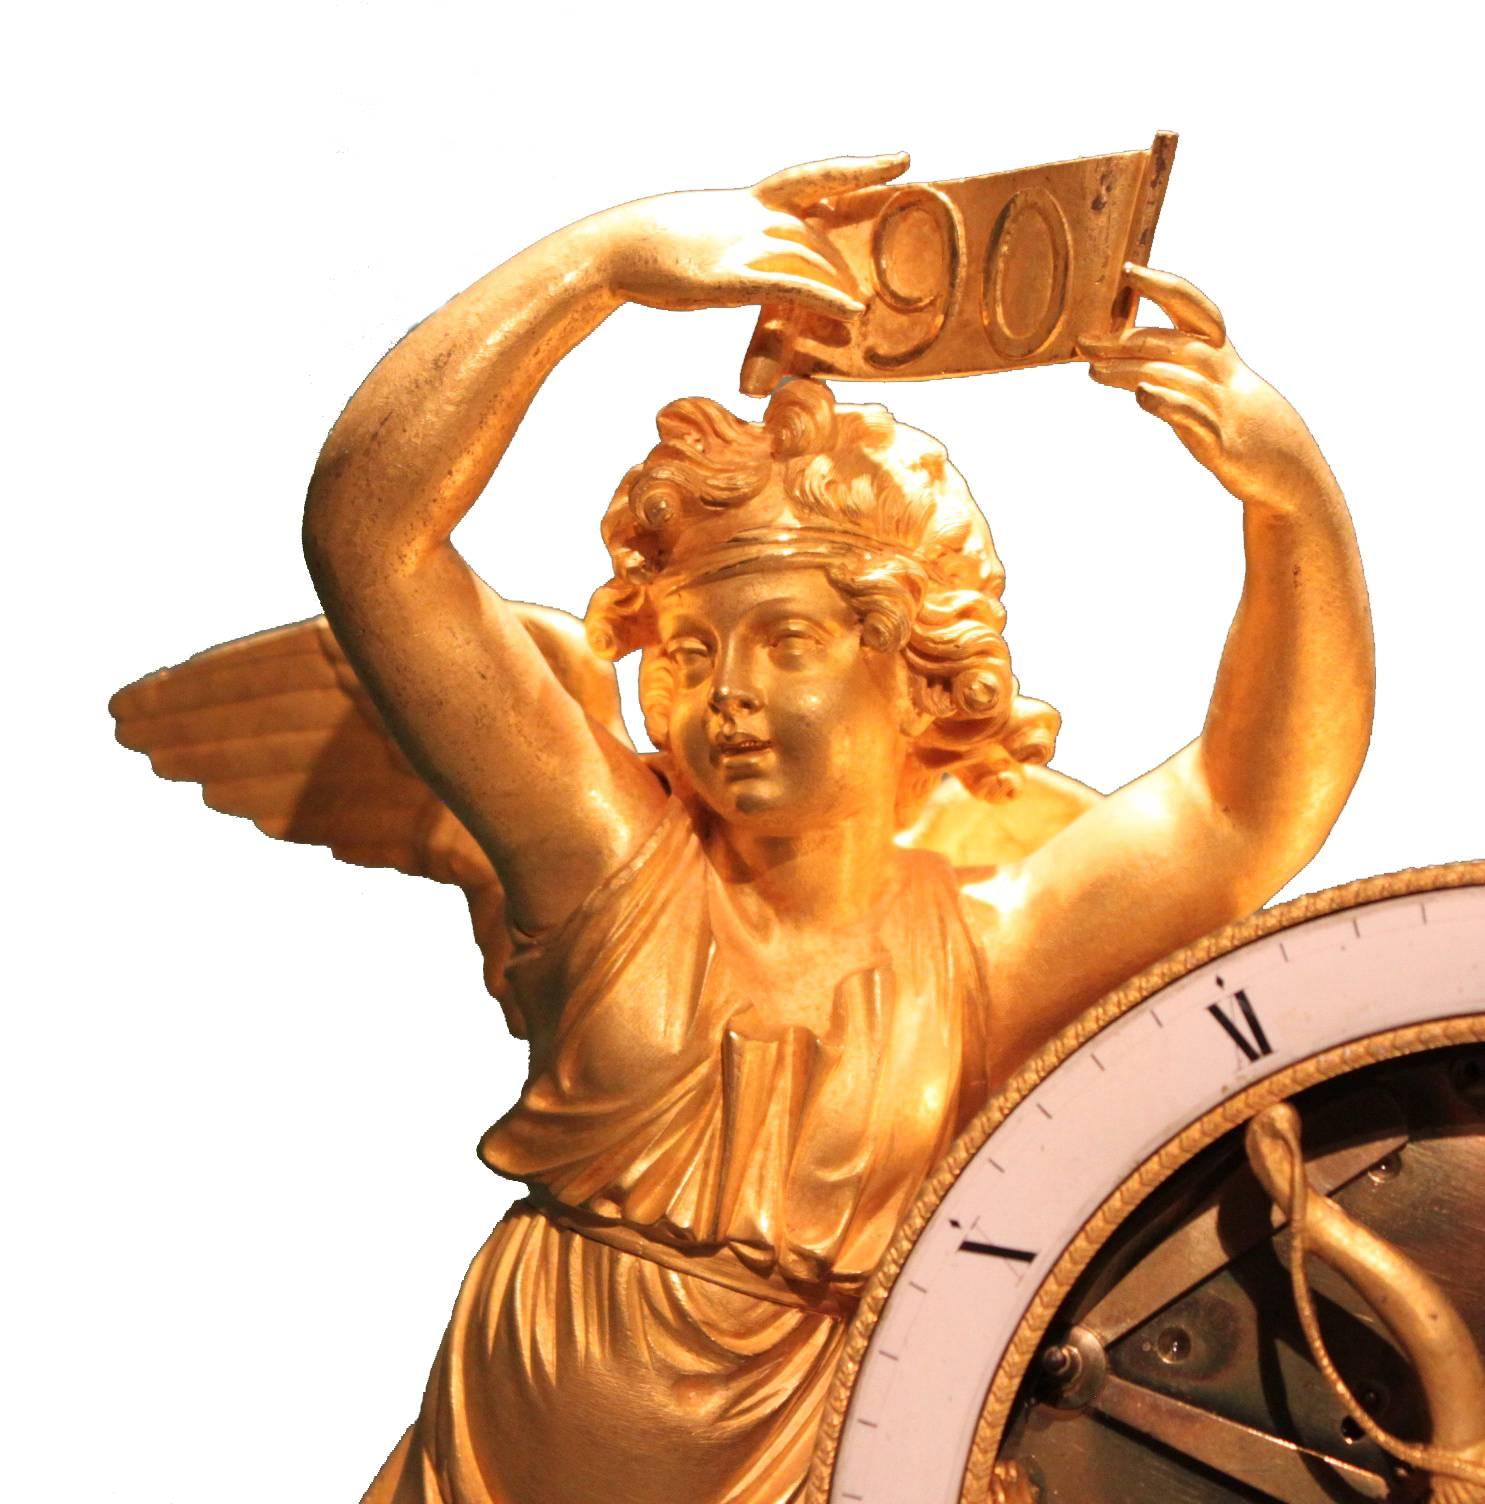 We proudly present this beautiful 1st periode empire pendule.

The putto is holding the winning ticket to the lottery and on the side you see the fortune is flowing with wealth. In the centre you see a putto reading the fortune of a lady's